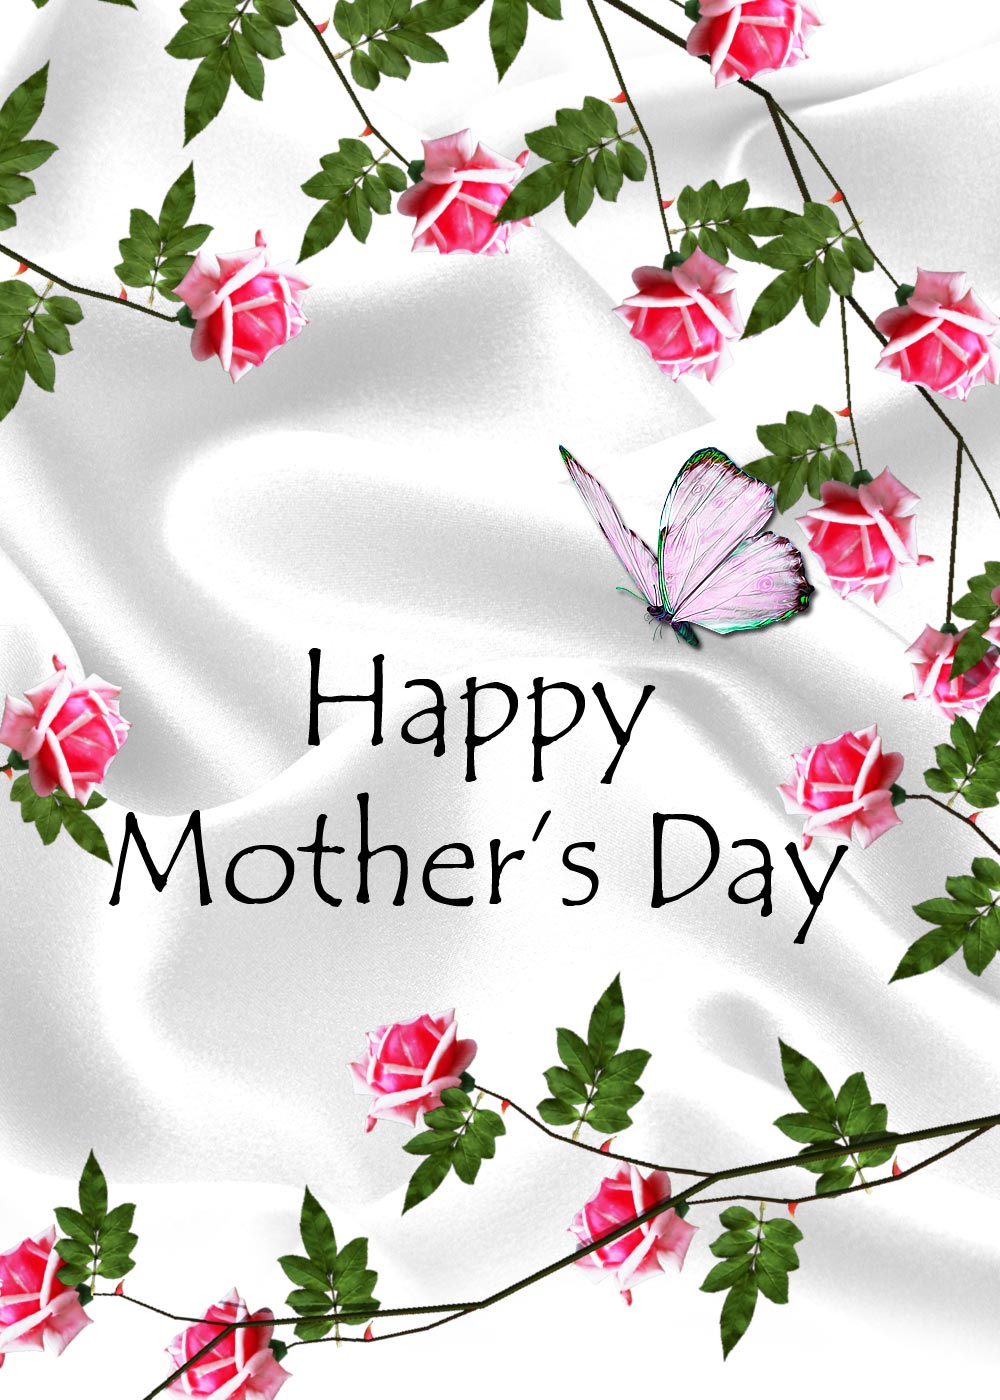 Free Mothers Day Greeting Cards Download - Happy Mothers Day To Moms And Single Dads , HD Wallpaper & Backgrounds